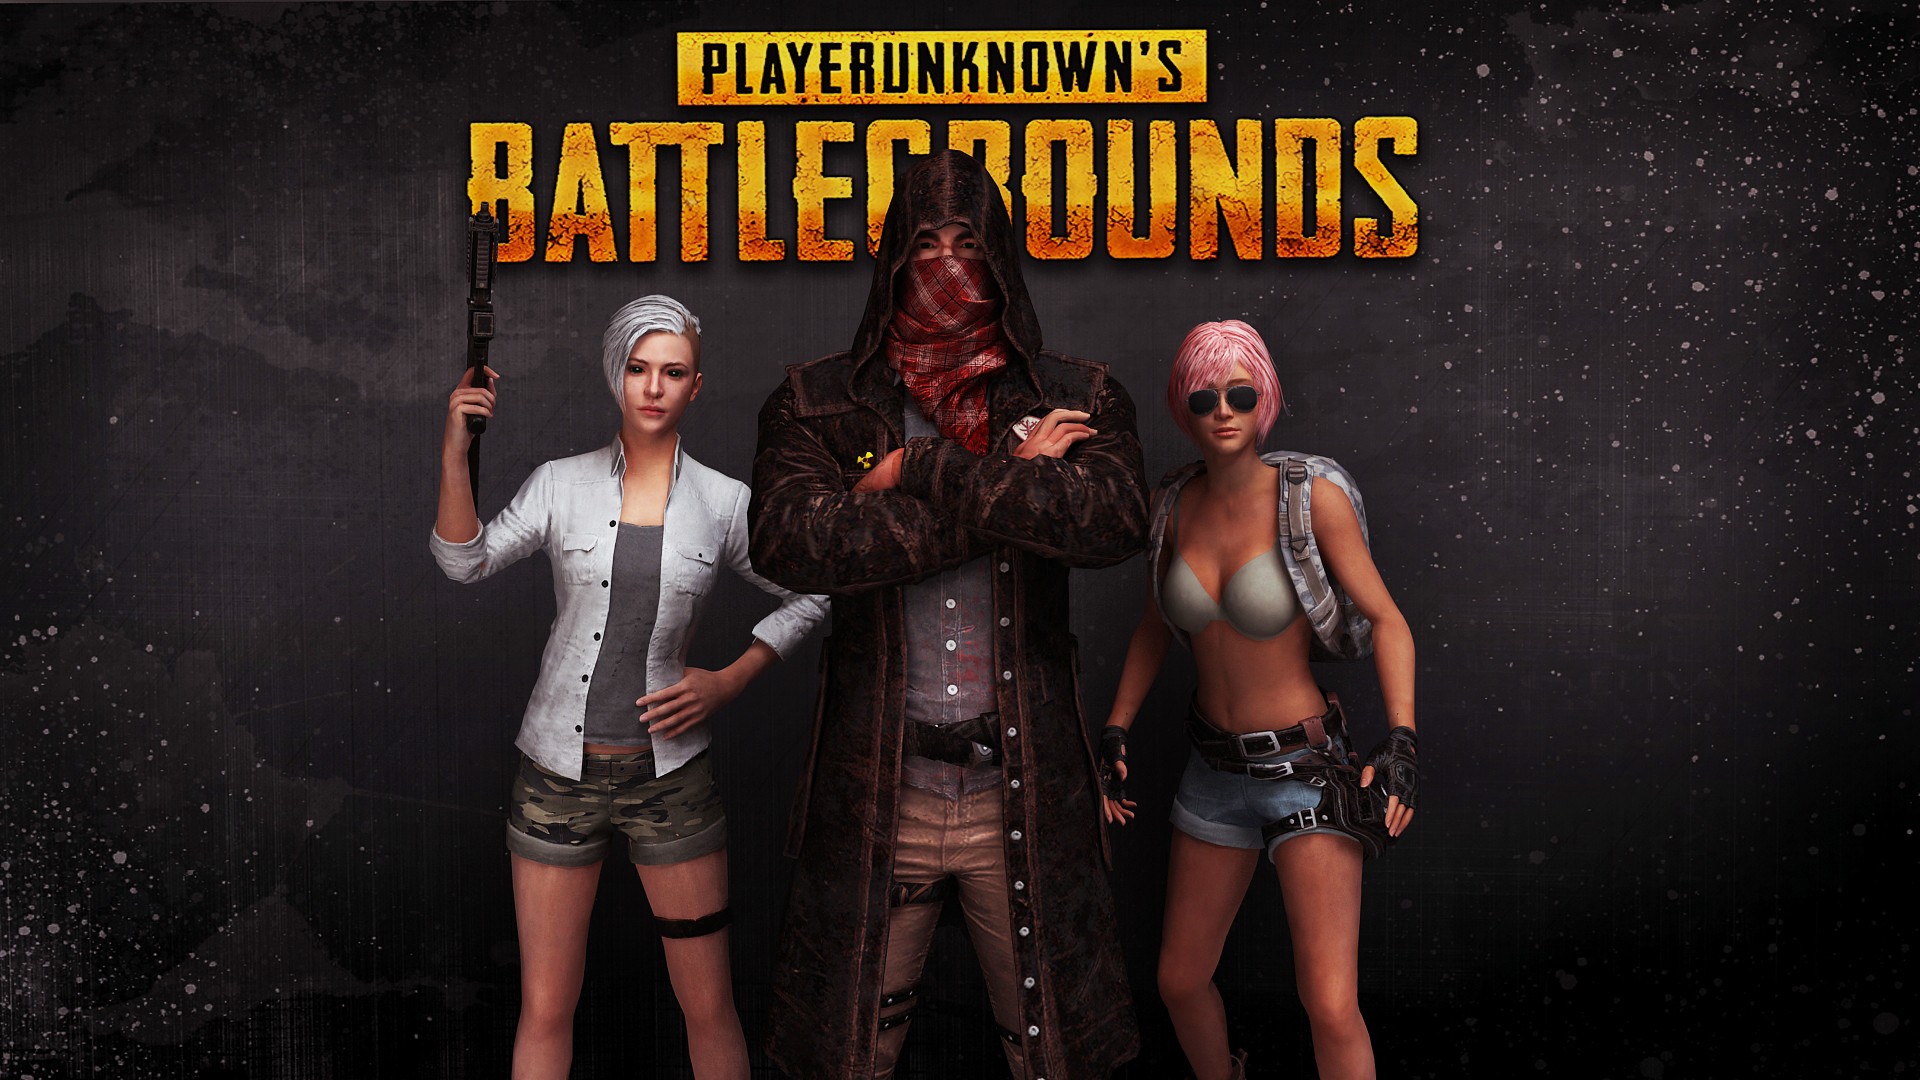 PUBG Xbox One Desktop Wallpaper with resolution 1920X1080 pixel. You can use this wallpaper as background for your desktop Computer Screensavers, Android or iPhone smartphones